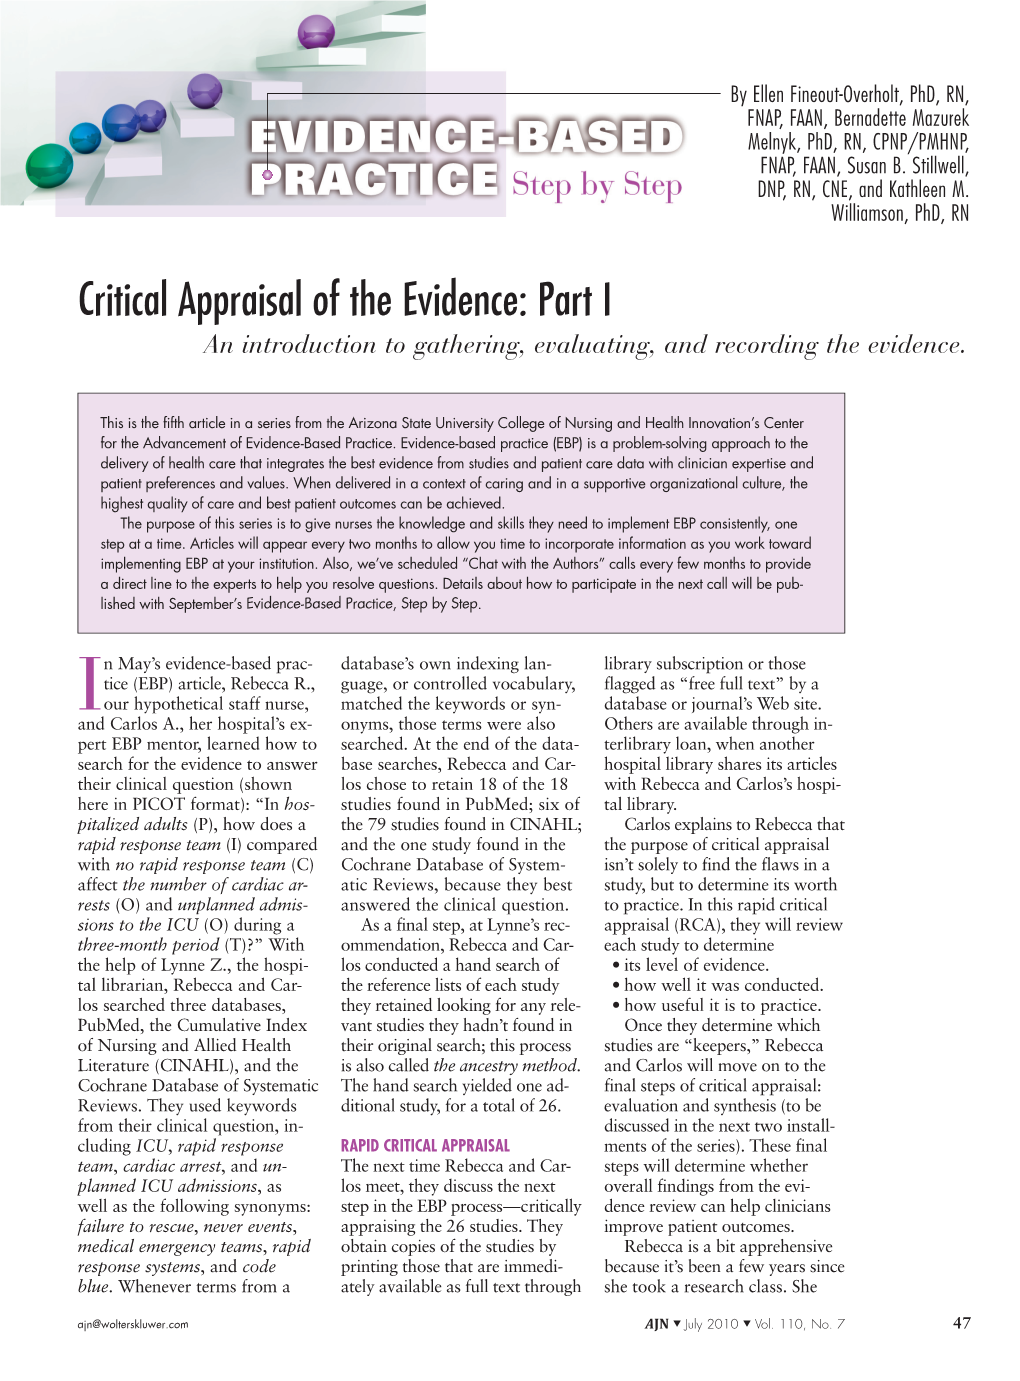 Critical Appraisal of the Evidence: Part I an Introduction to Gathering, Evaluating, and Recording the Evidence